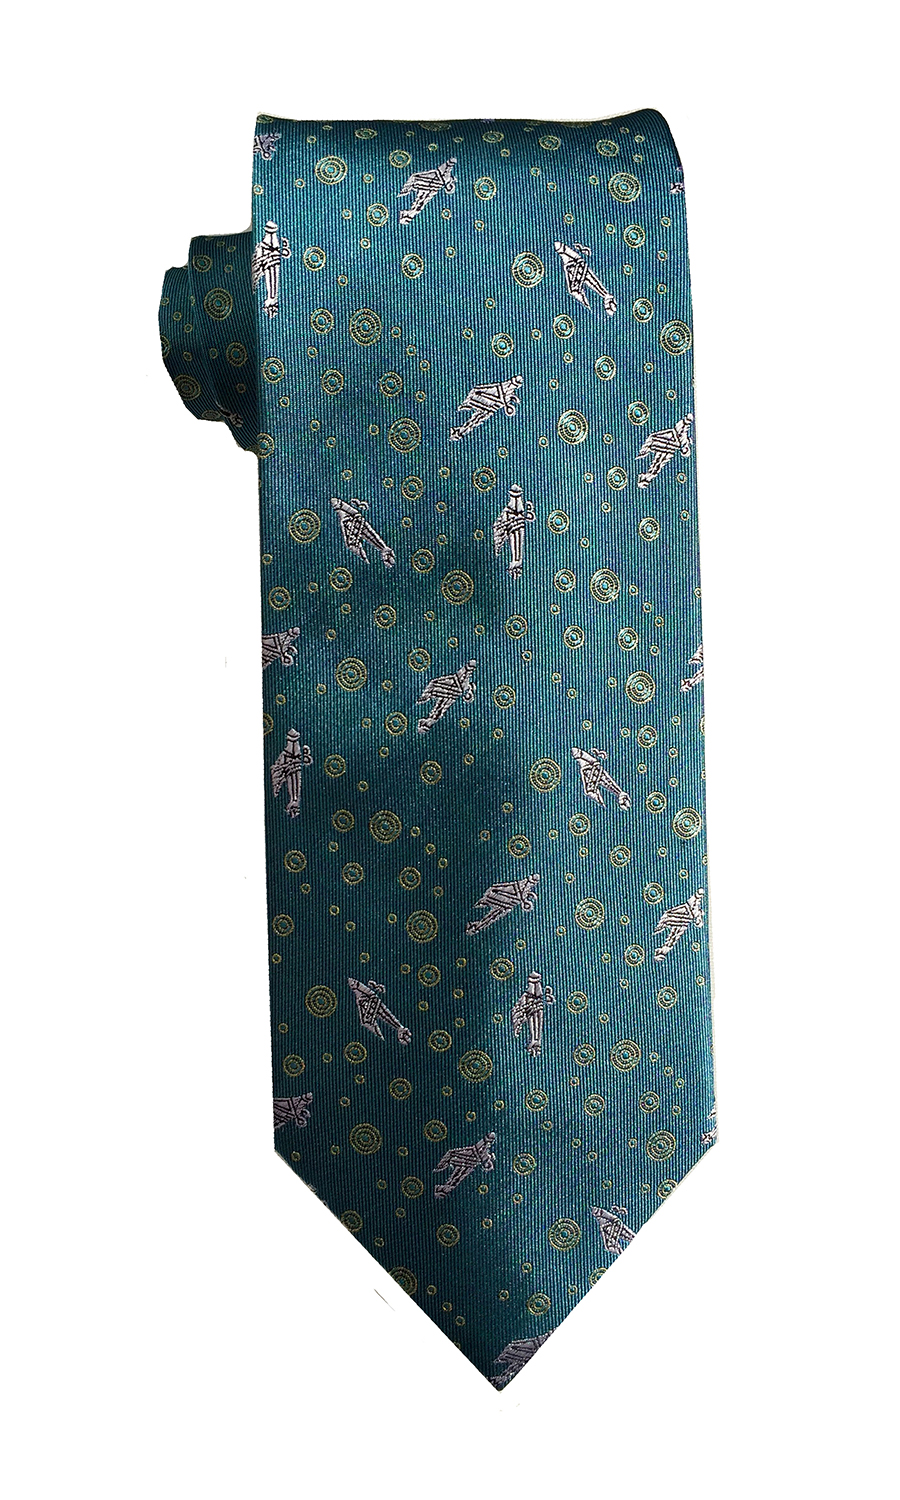 Spirit of St. Louis airplane tie in turquoise